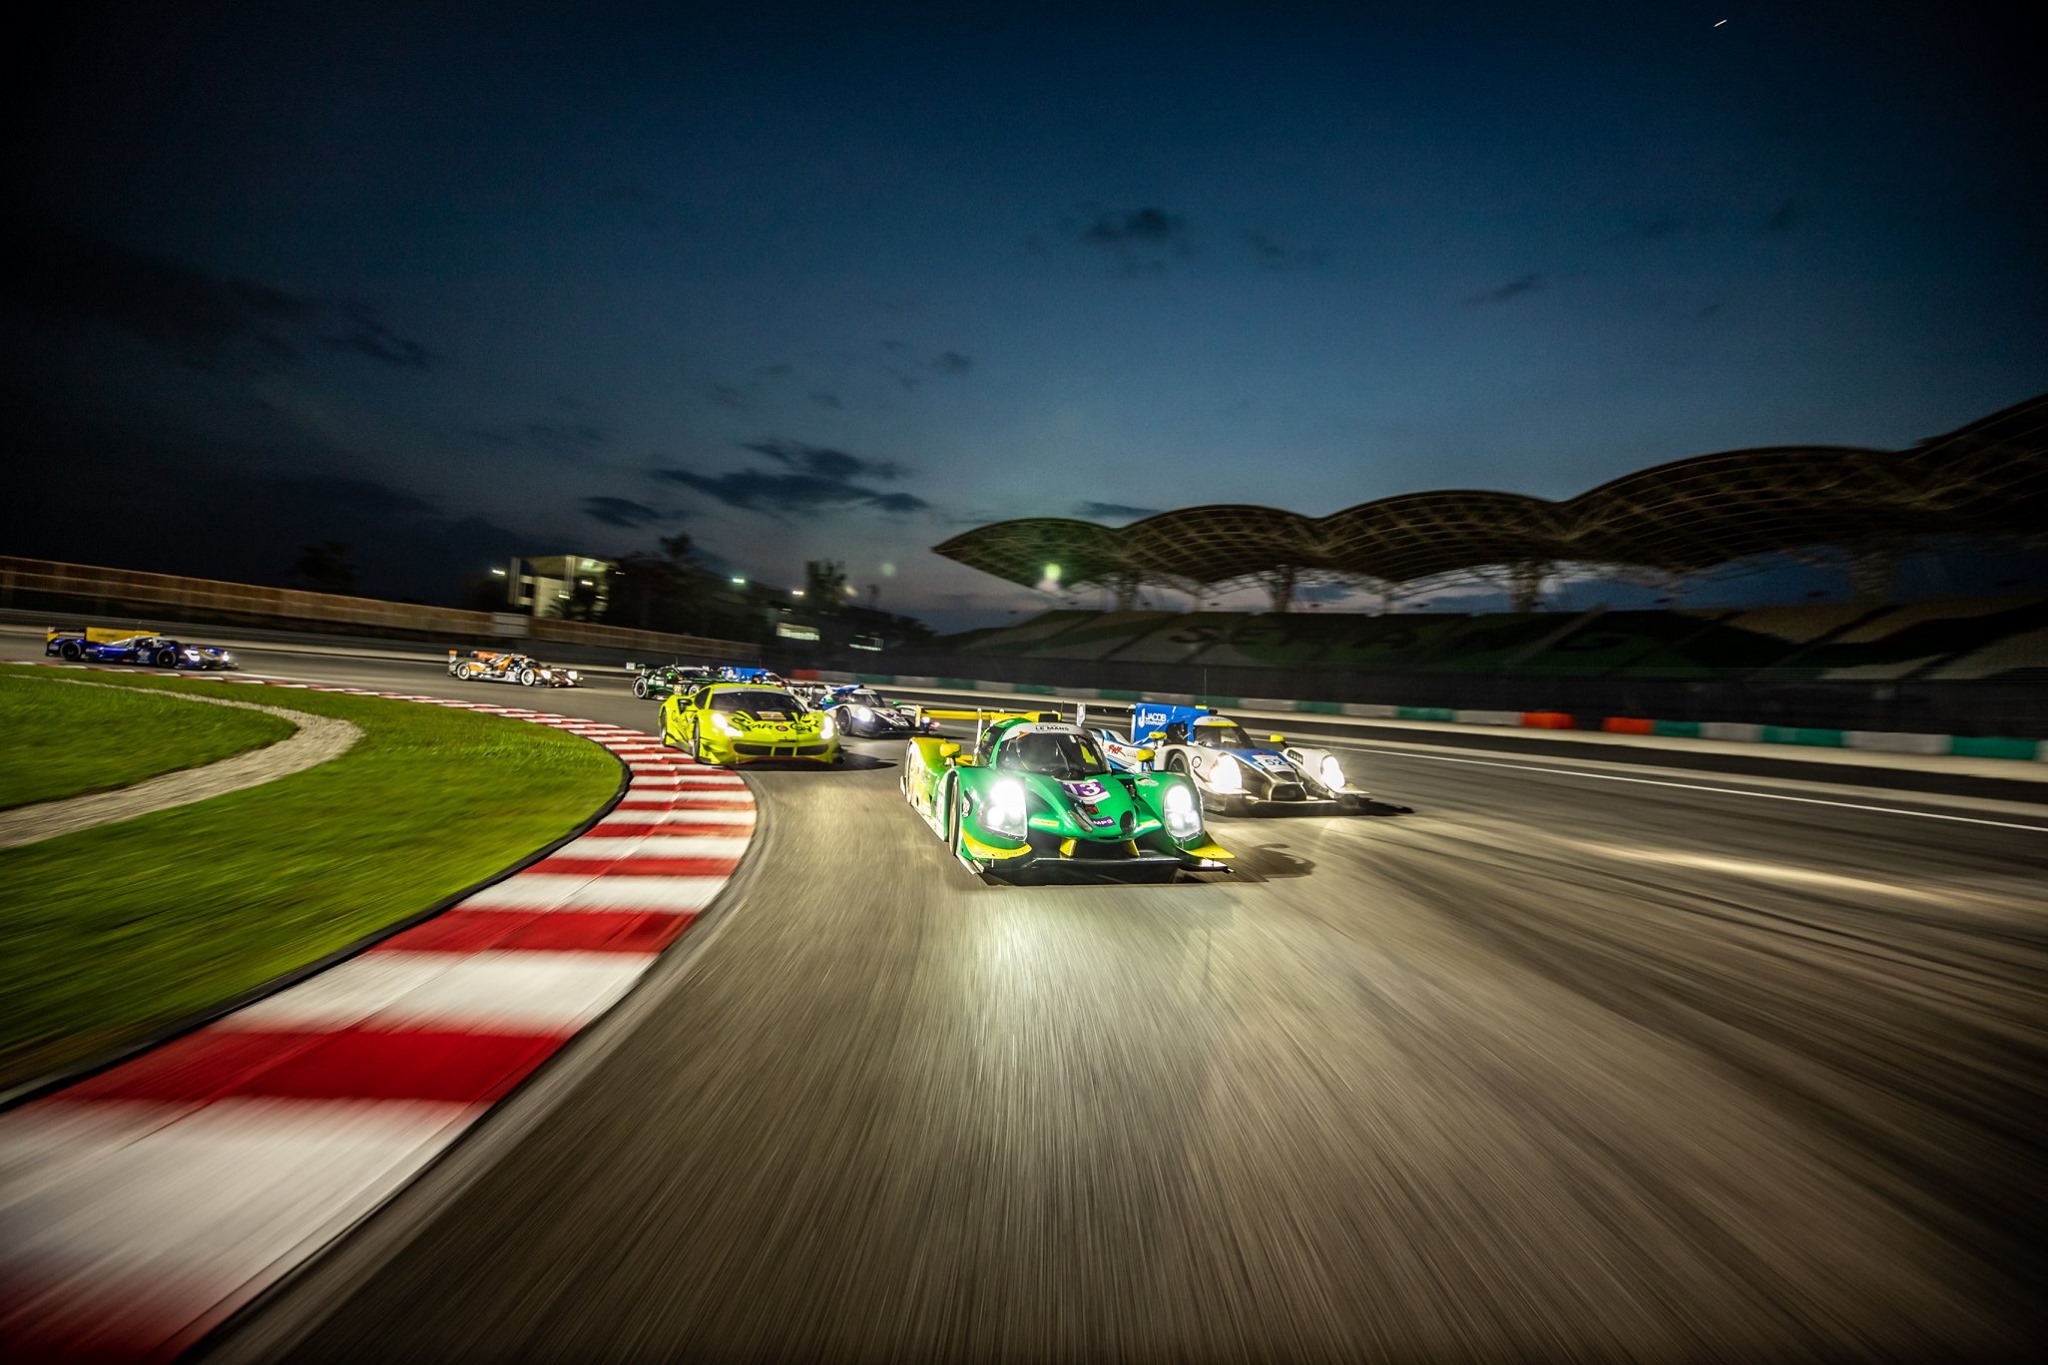 Under Lights In Sepang